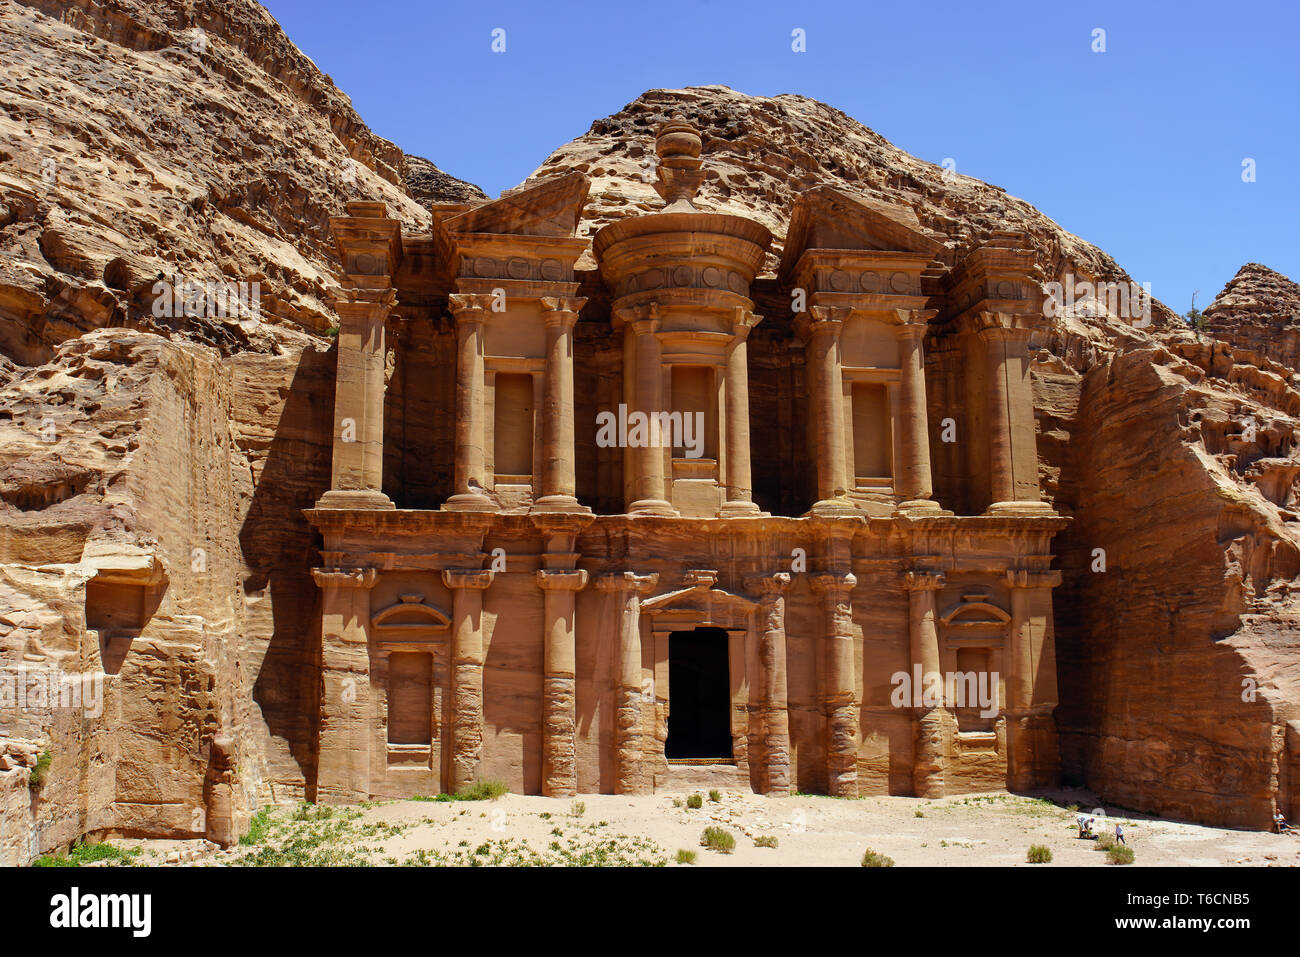 View of famous The Monastery in Petra, Jordan. Stock Photo